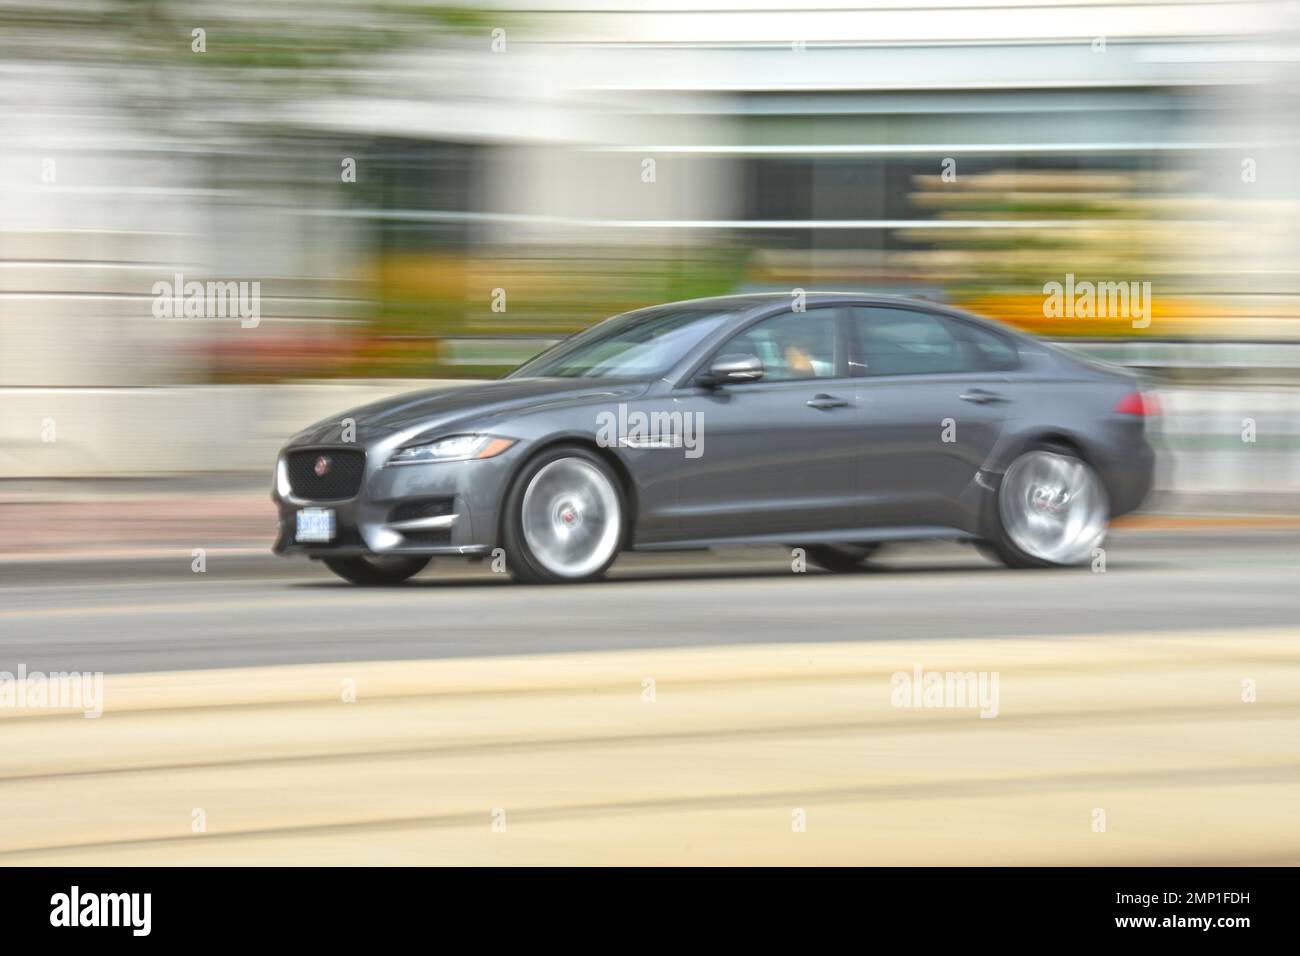 Car moving - blurred motion Stock Photo